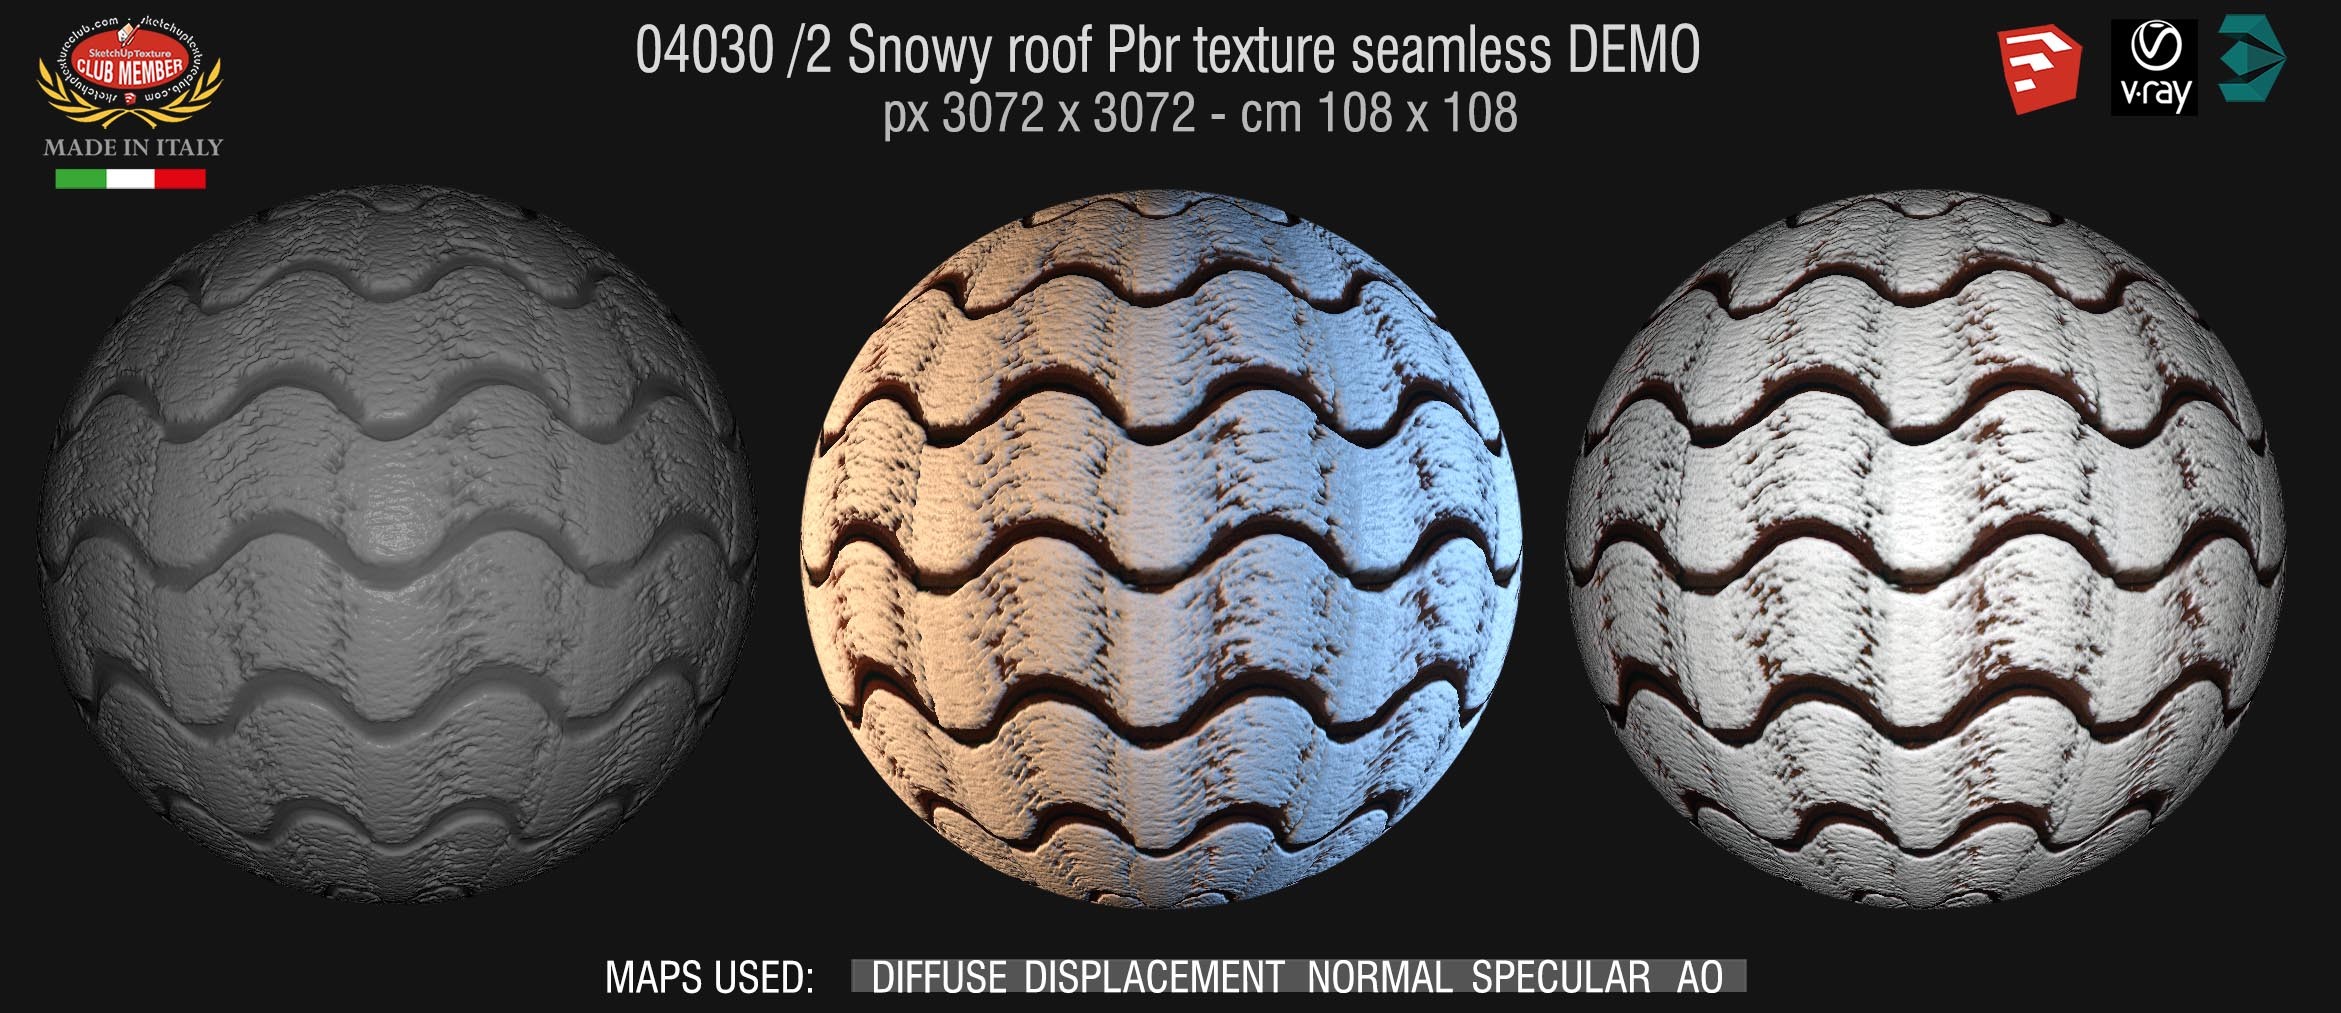 04030 /2 Snowy roof Pbr texture seamless DEMO